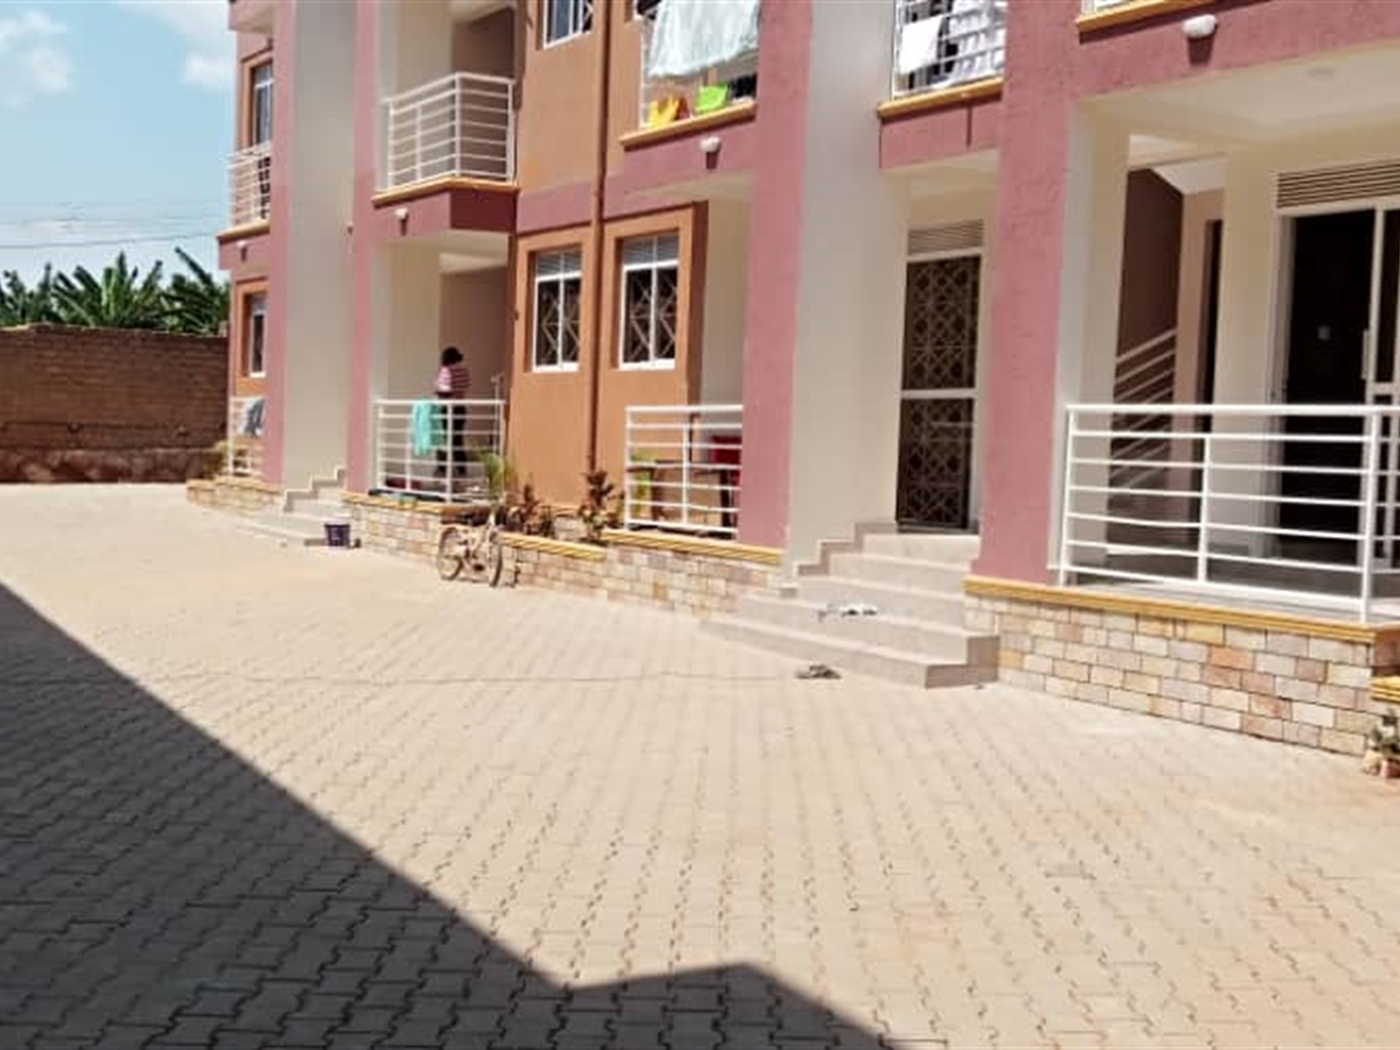 Apartment block for sale in Mbuya Wakiso